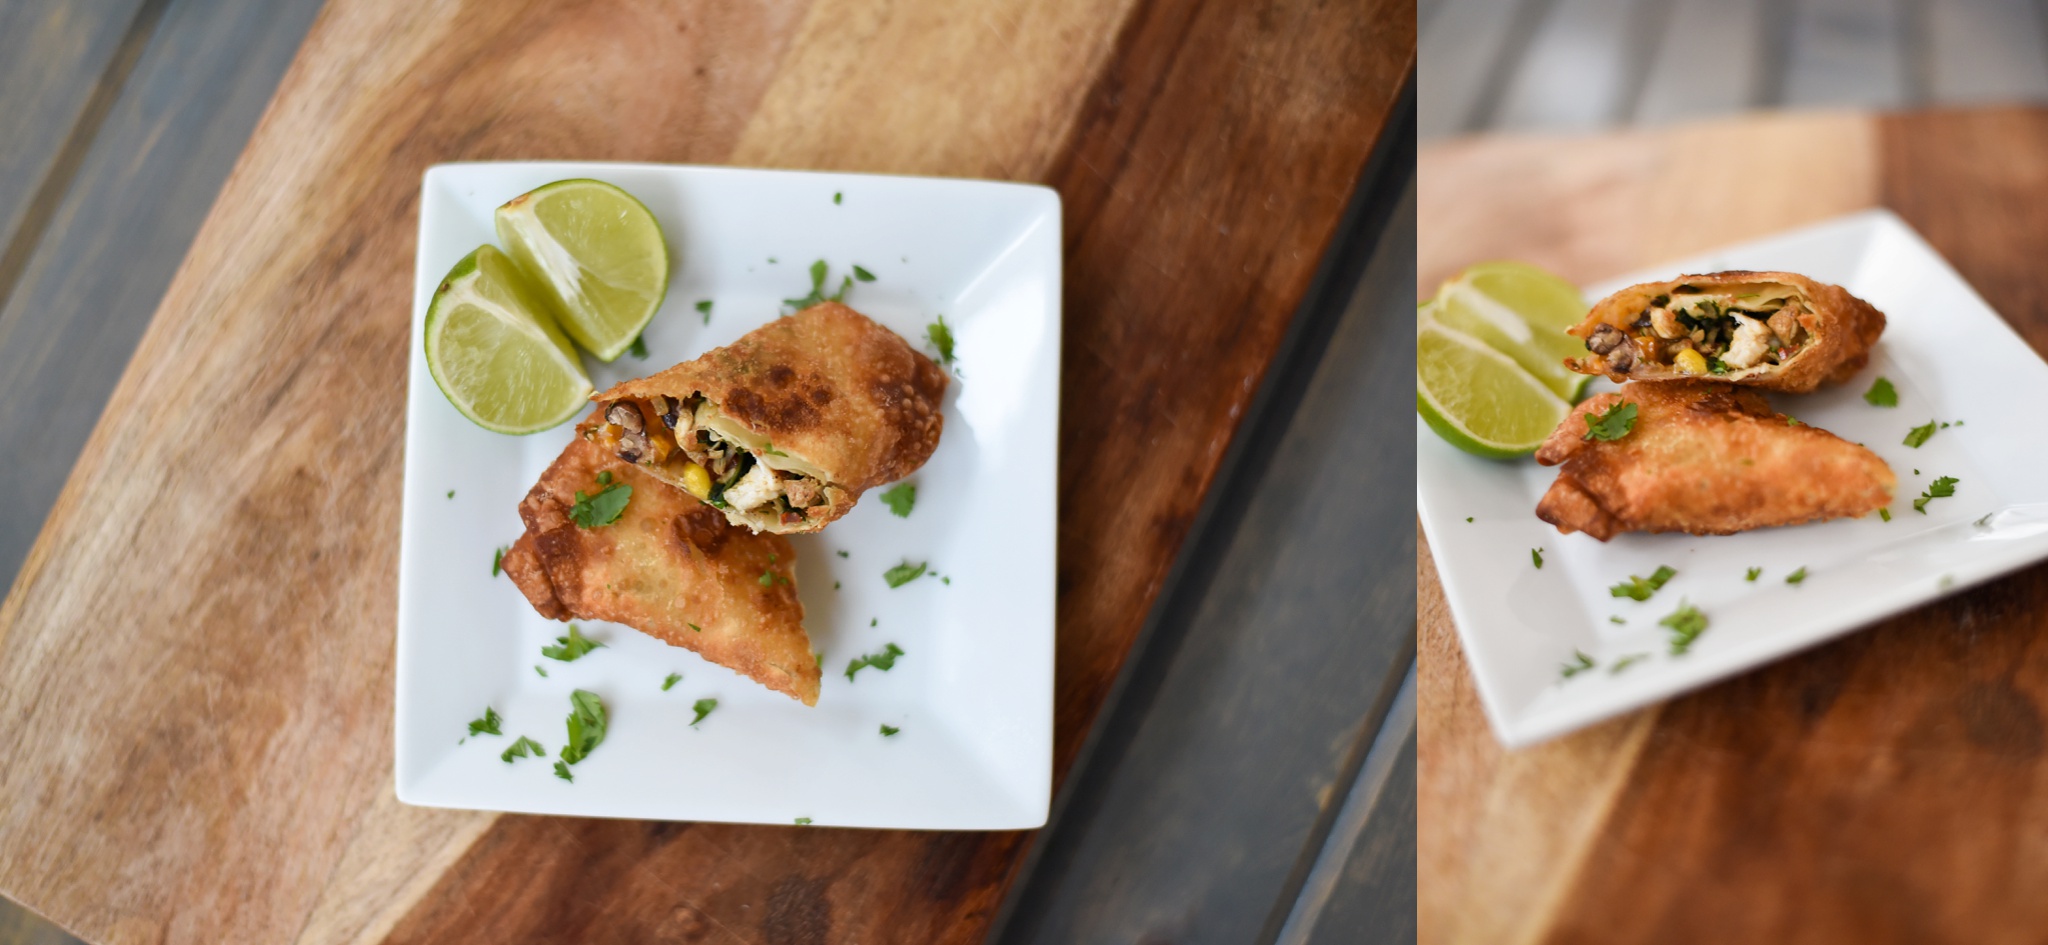 Your favorite restaurant appetizer can now be made at home. Enjoy my Southwestern Eggrolls full of flavor complete with the perfect crunch. -- www.thenewmrsallen.com